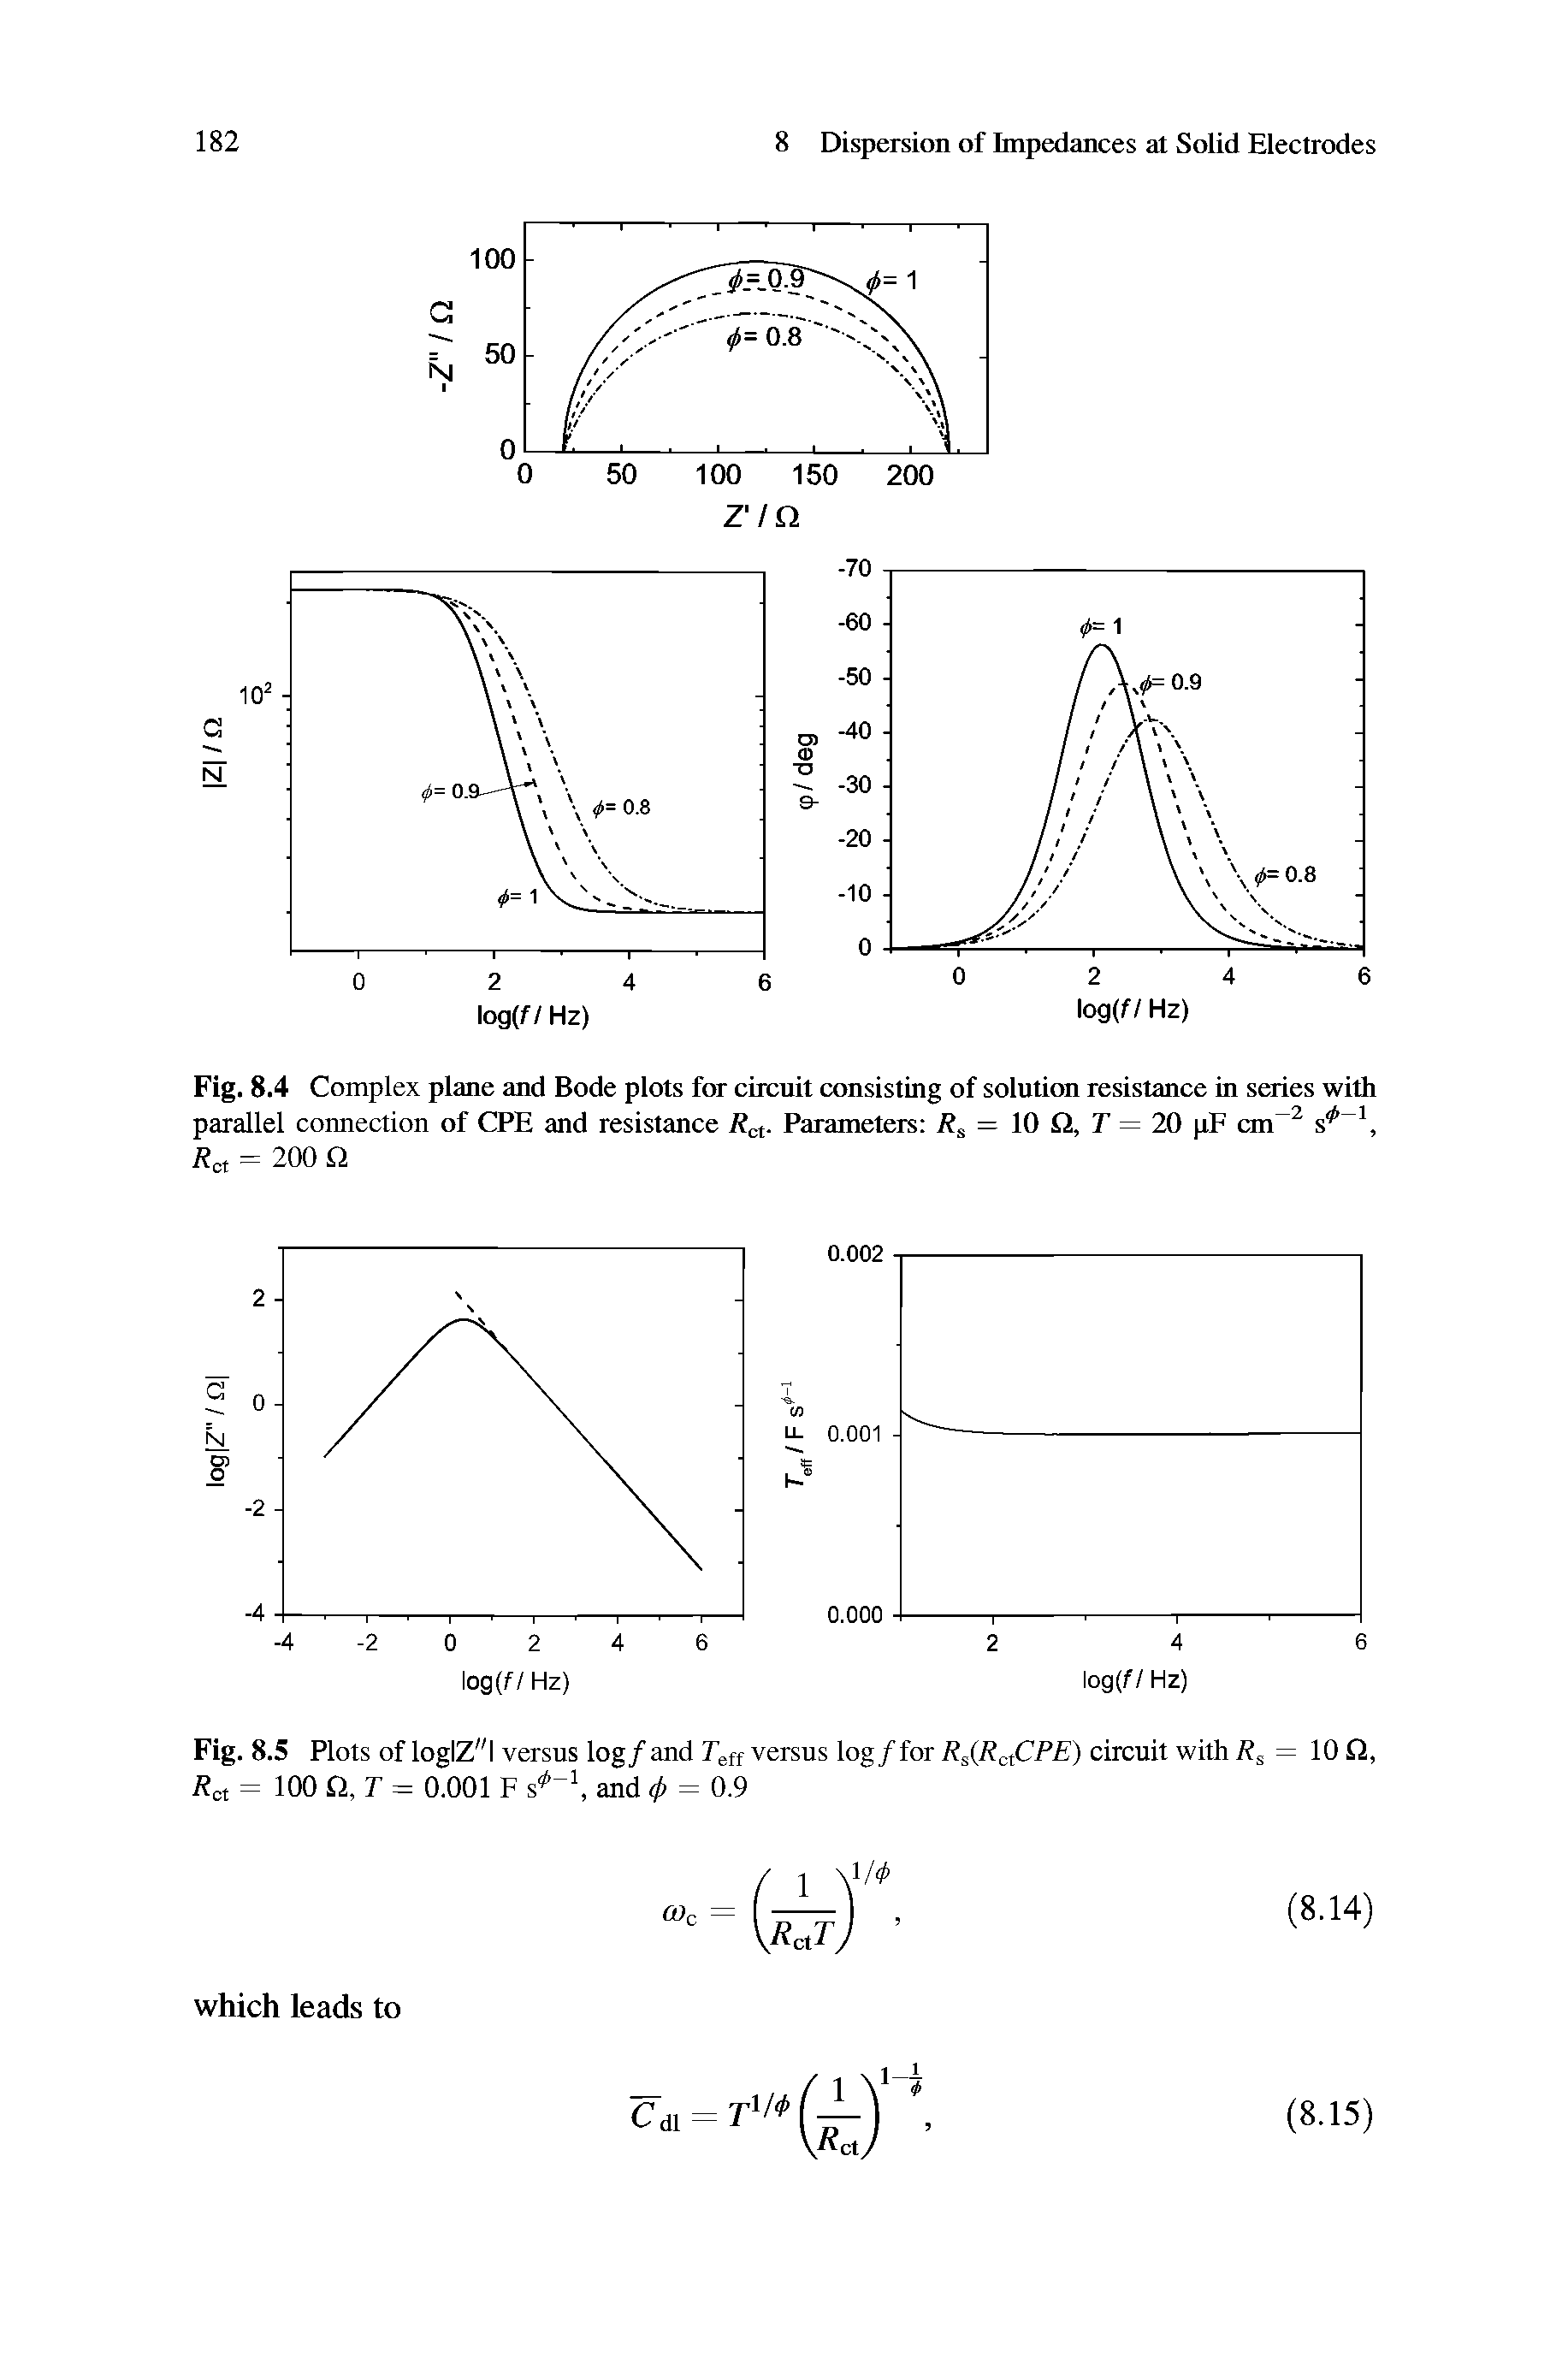 Fig. 8.4 Complex plane and Bode plots for circuit consisting of solution resistance in series with parallel connection of CPE and resistance R. Parameters = 10 D, T = 20 pF cm s, ...